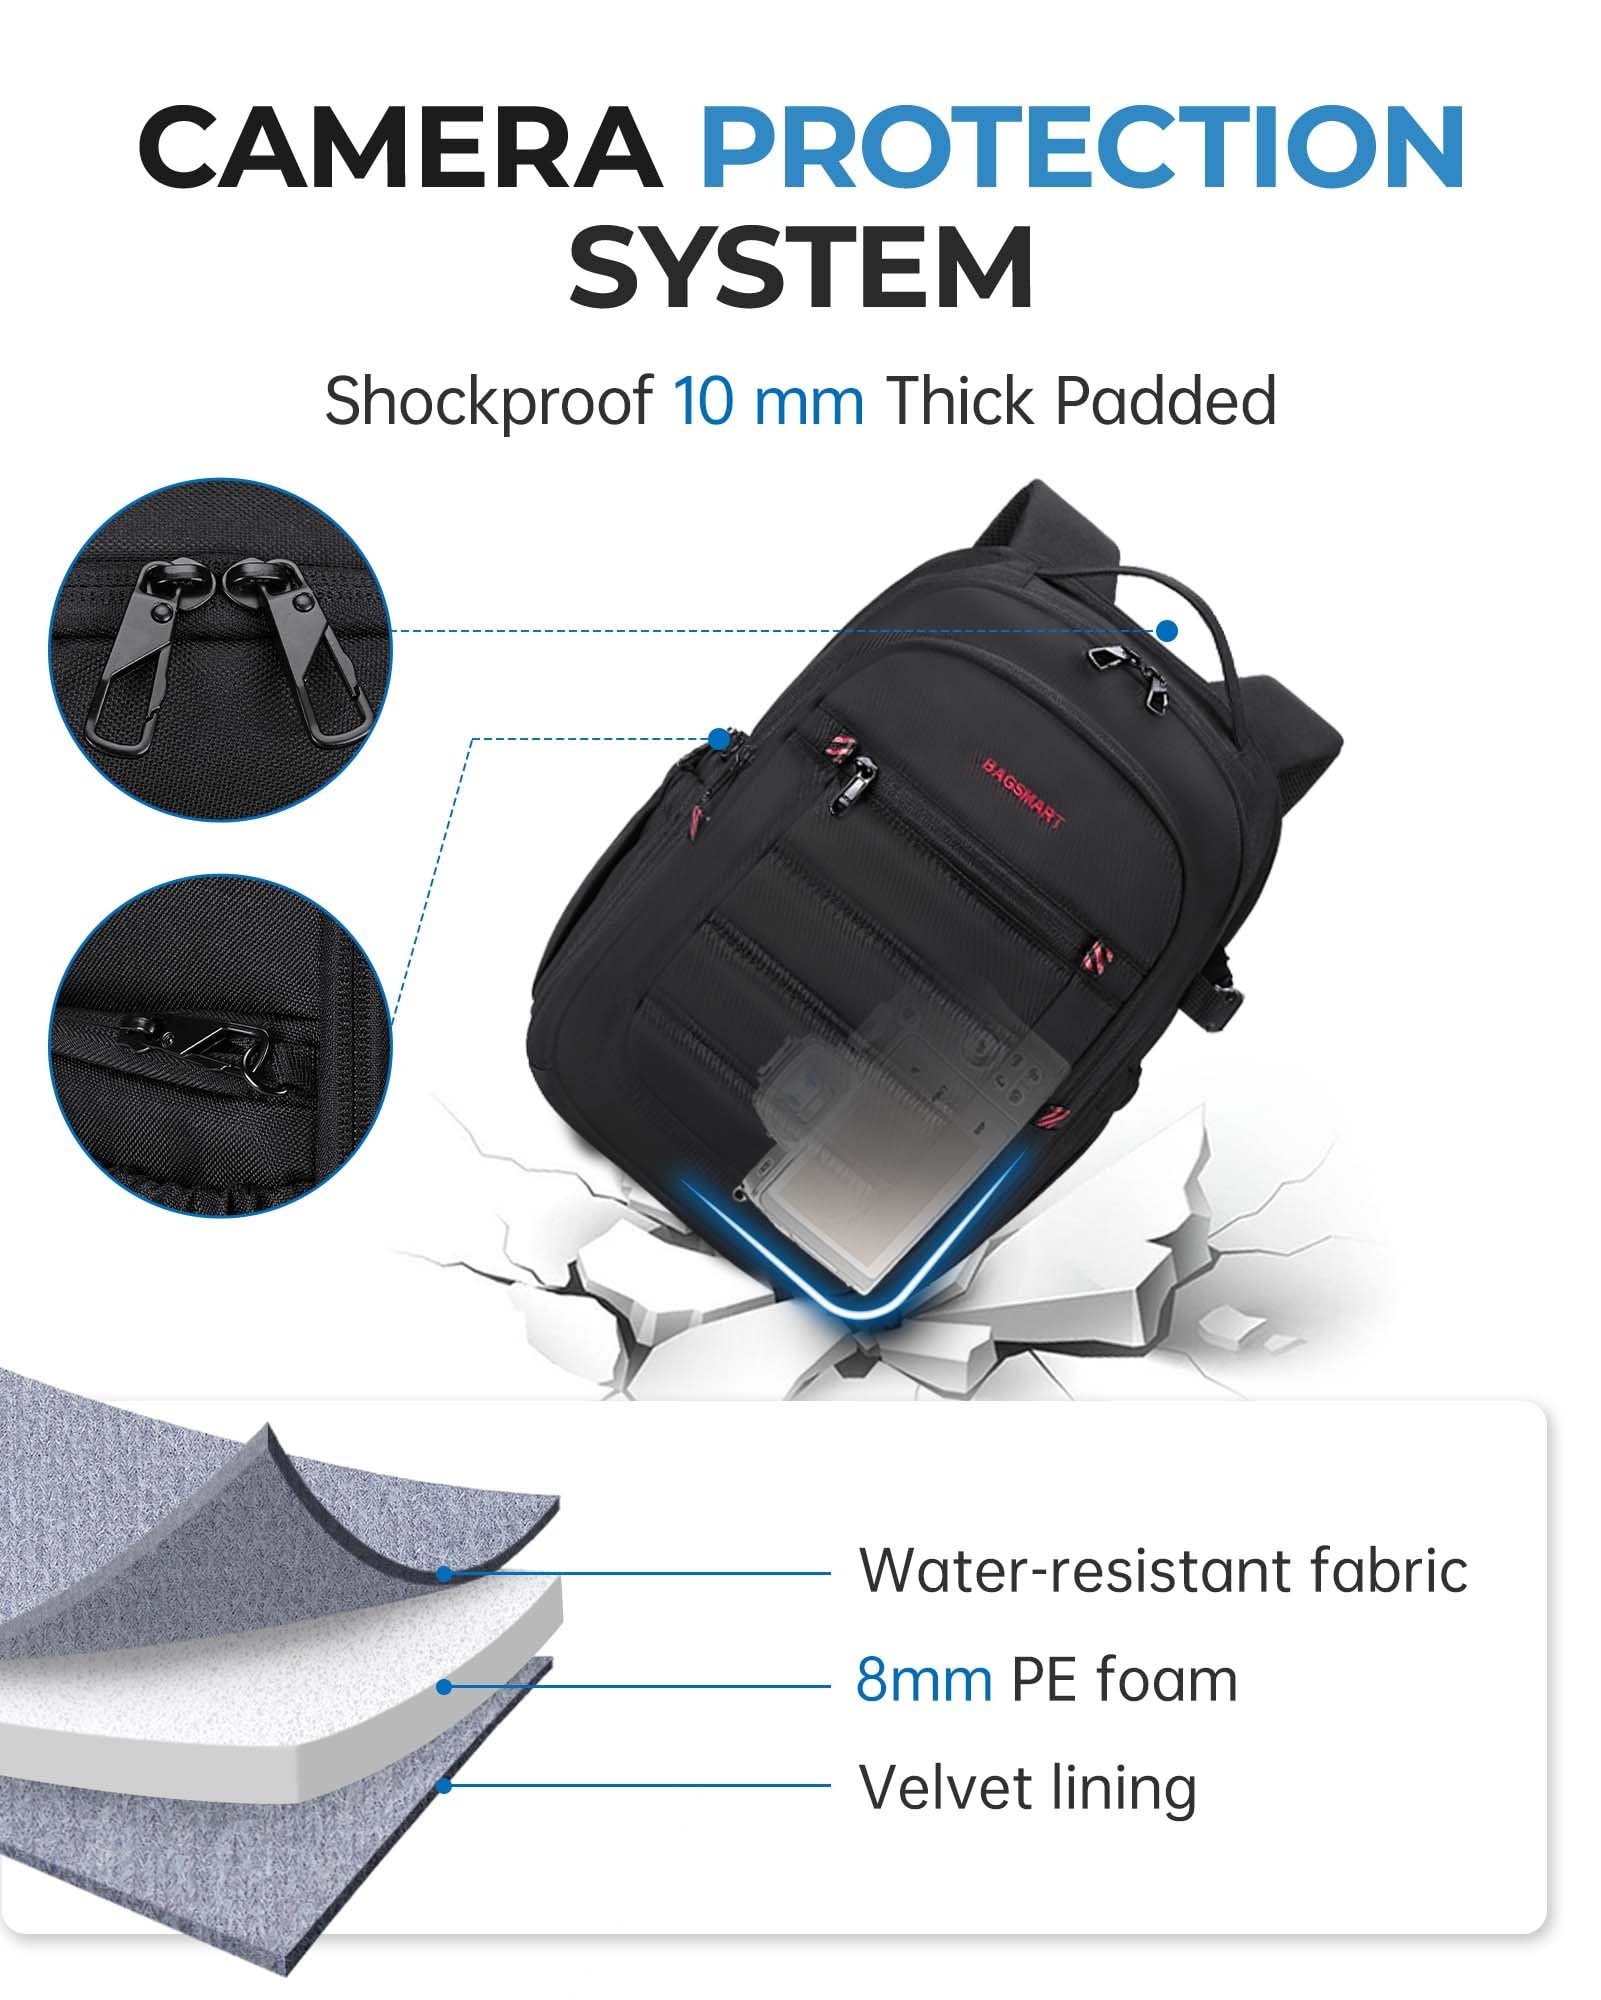 BAGSMART Camera Backpack, Expandable DSLR SLR Camera Bags for Photographers, Photography Travel Backpack with 15.6" Laptop Compartment, Rain Cover & Tripod Holder, Black